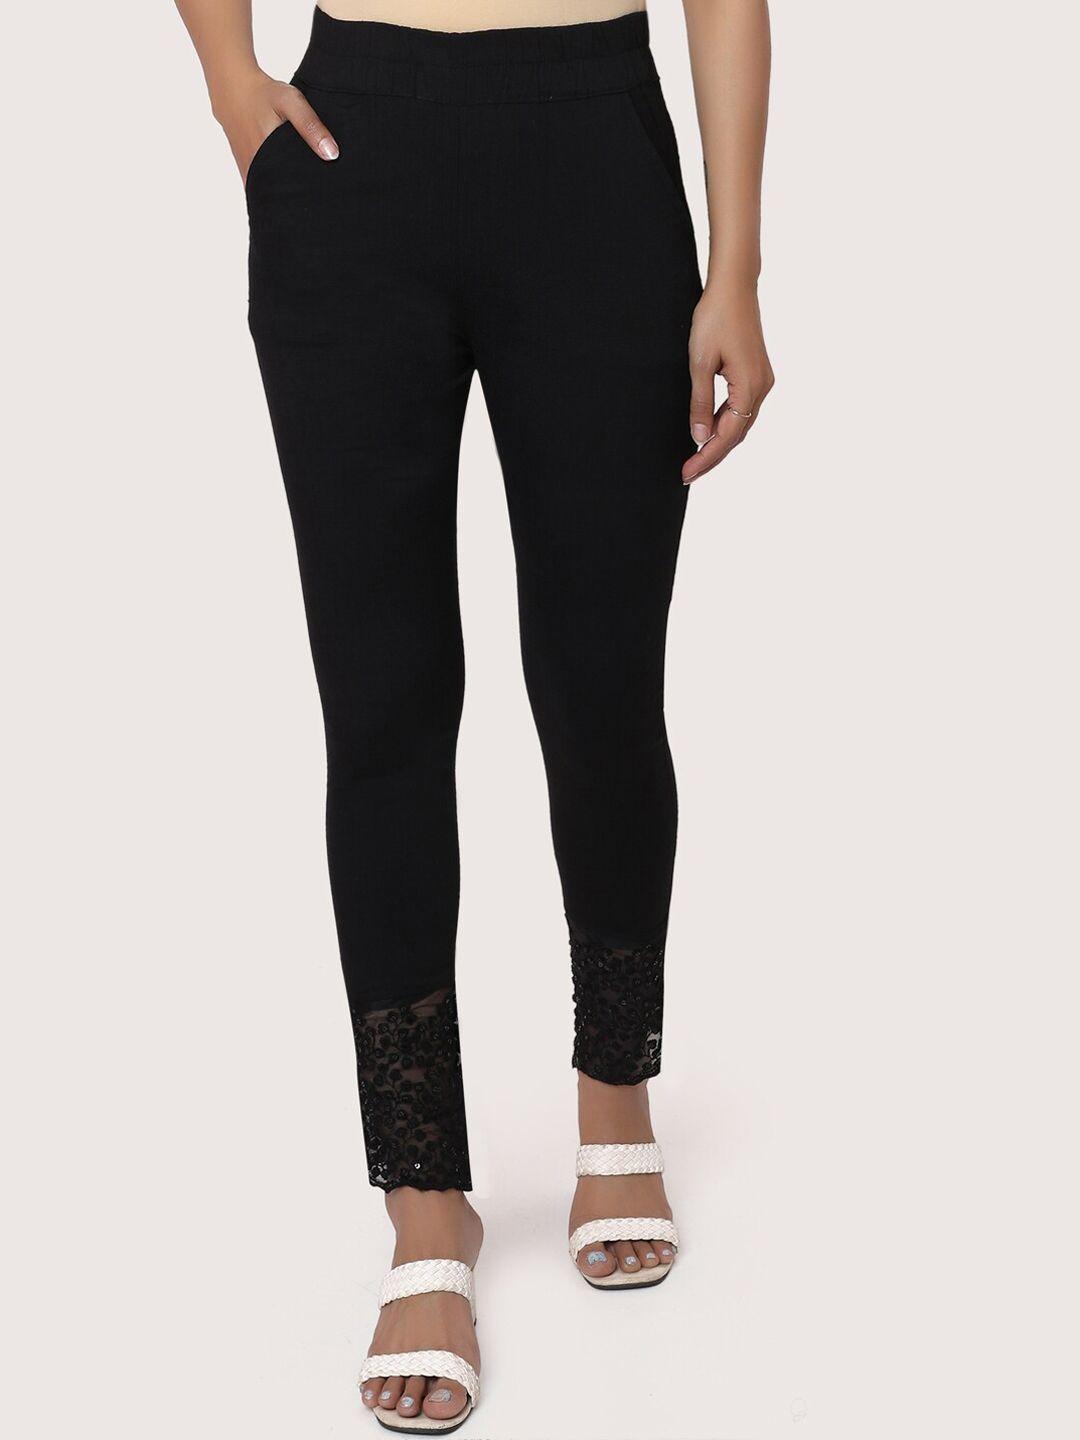 zri-women-black-floral-embroidered-smart-trousers